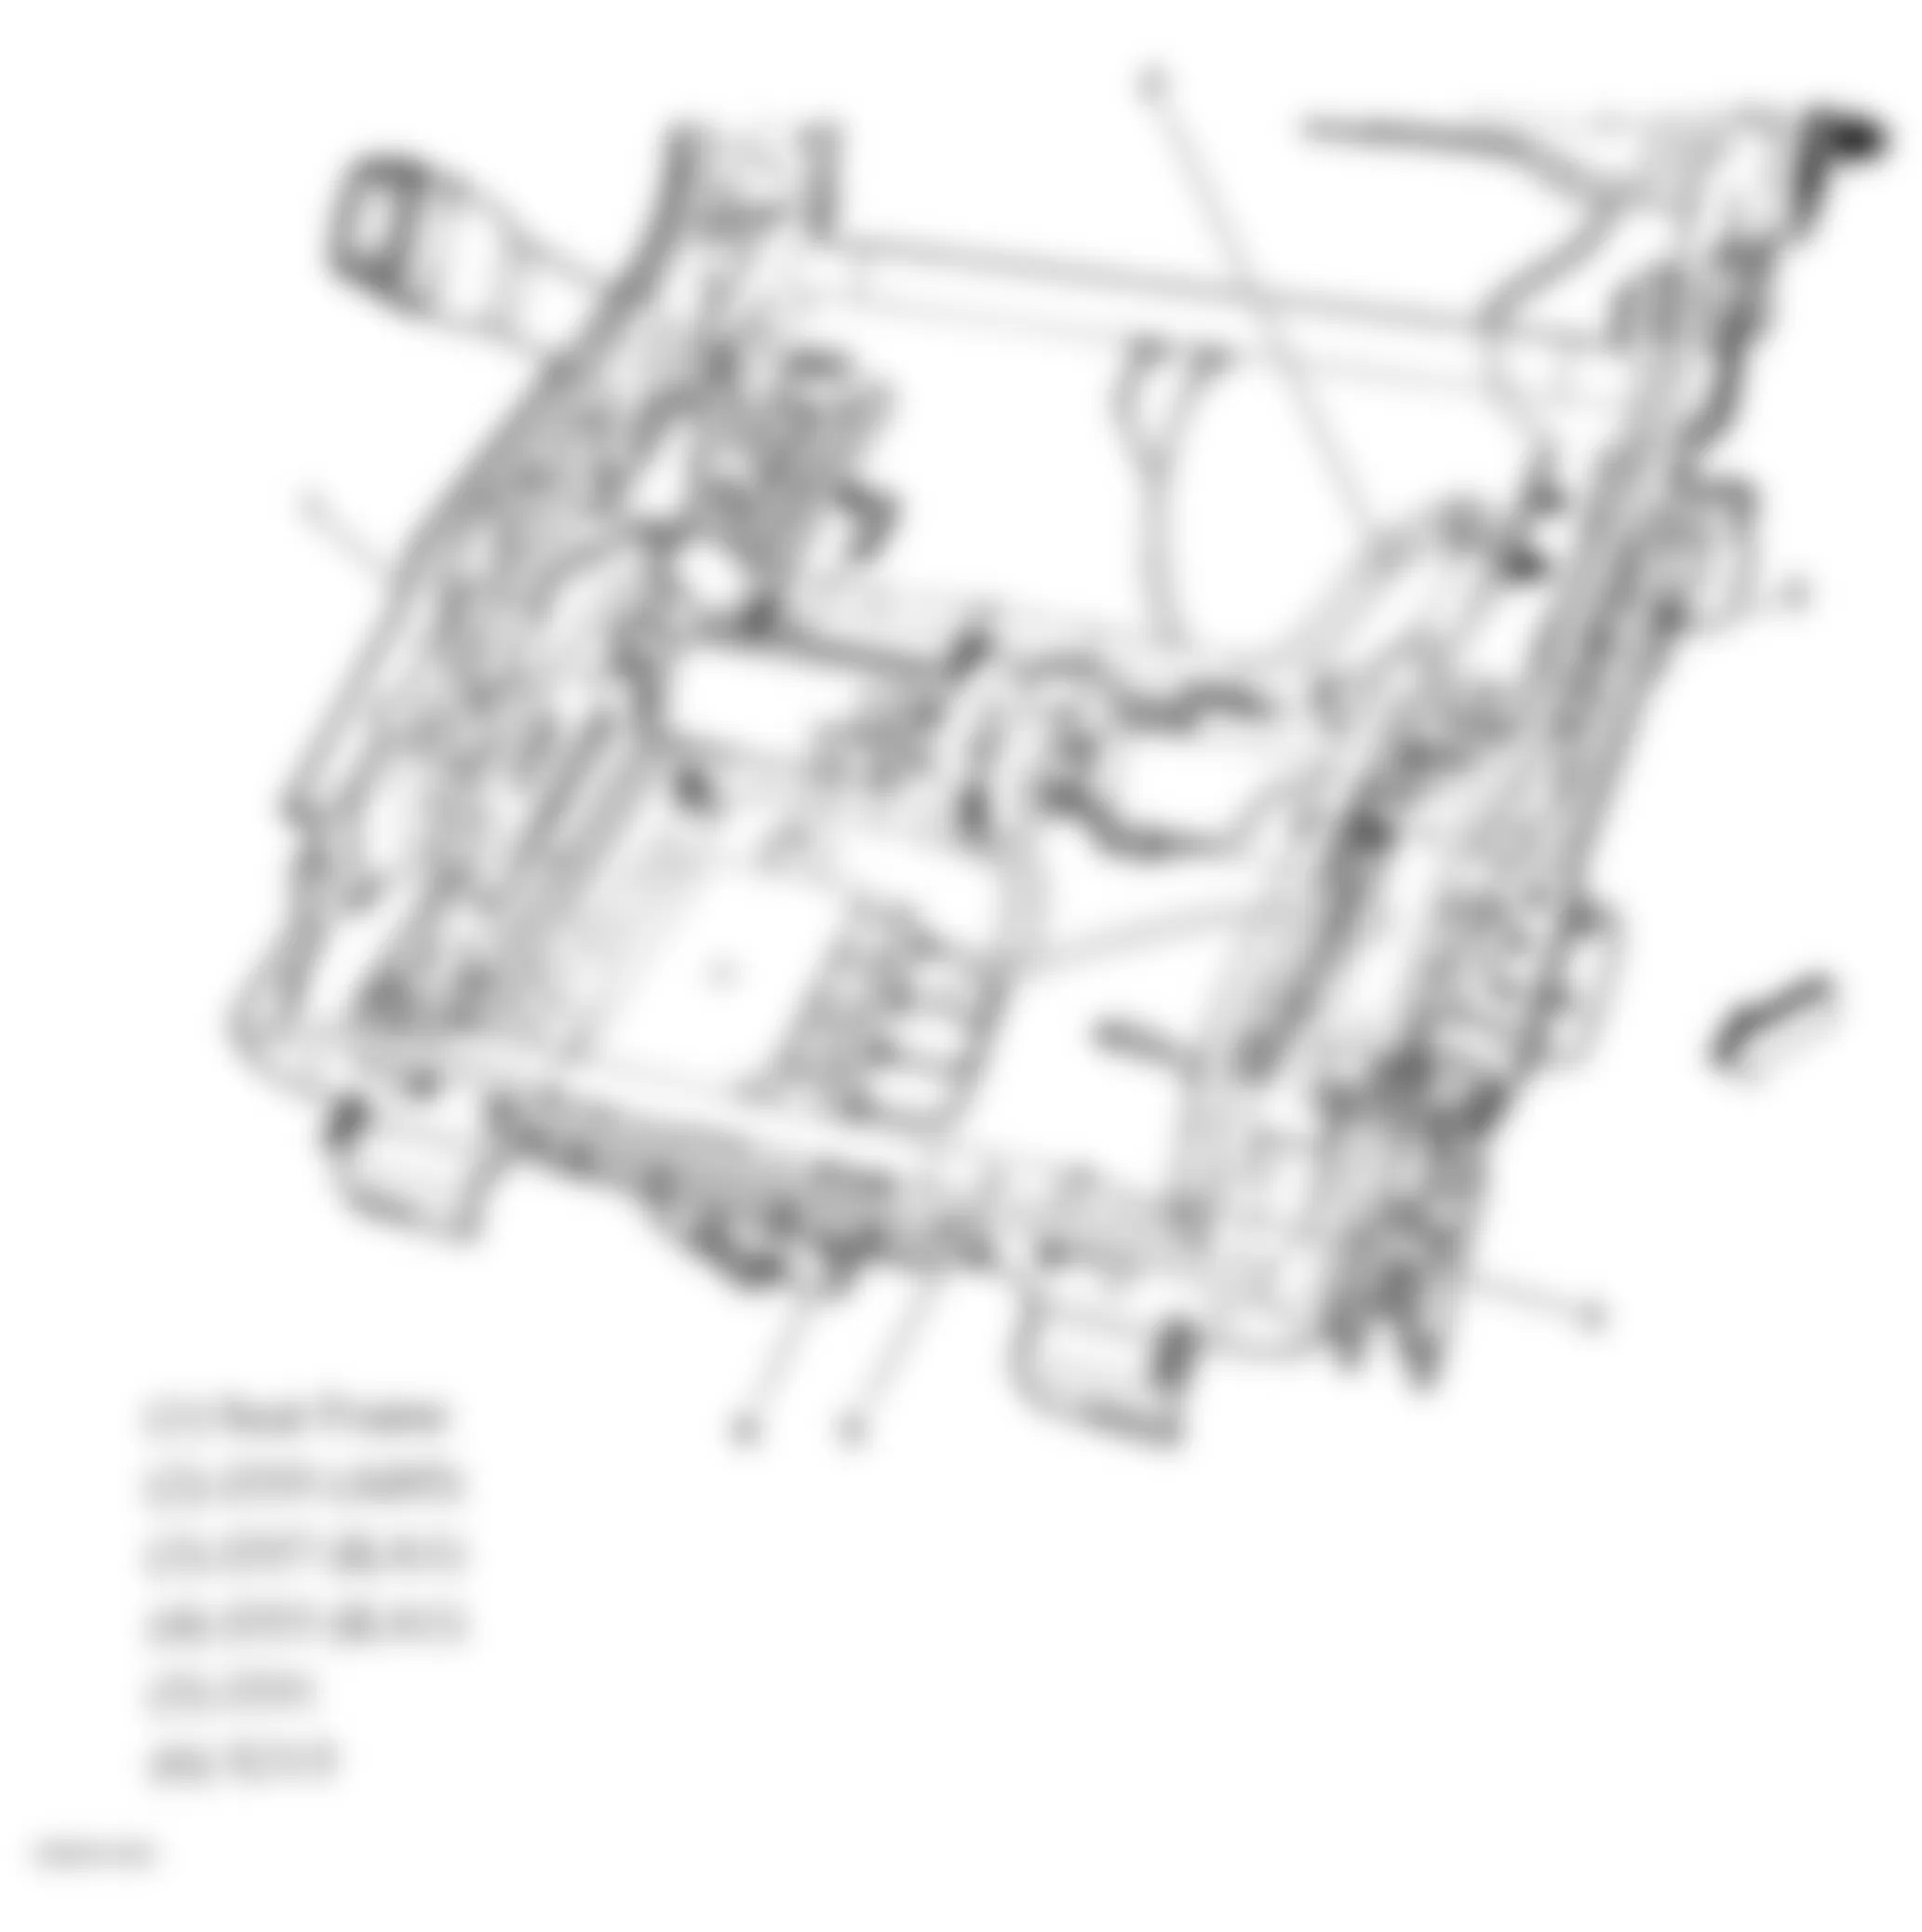 GMC Acadia SL 2010 - Component Locations -  Under Drivers Seat